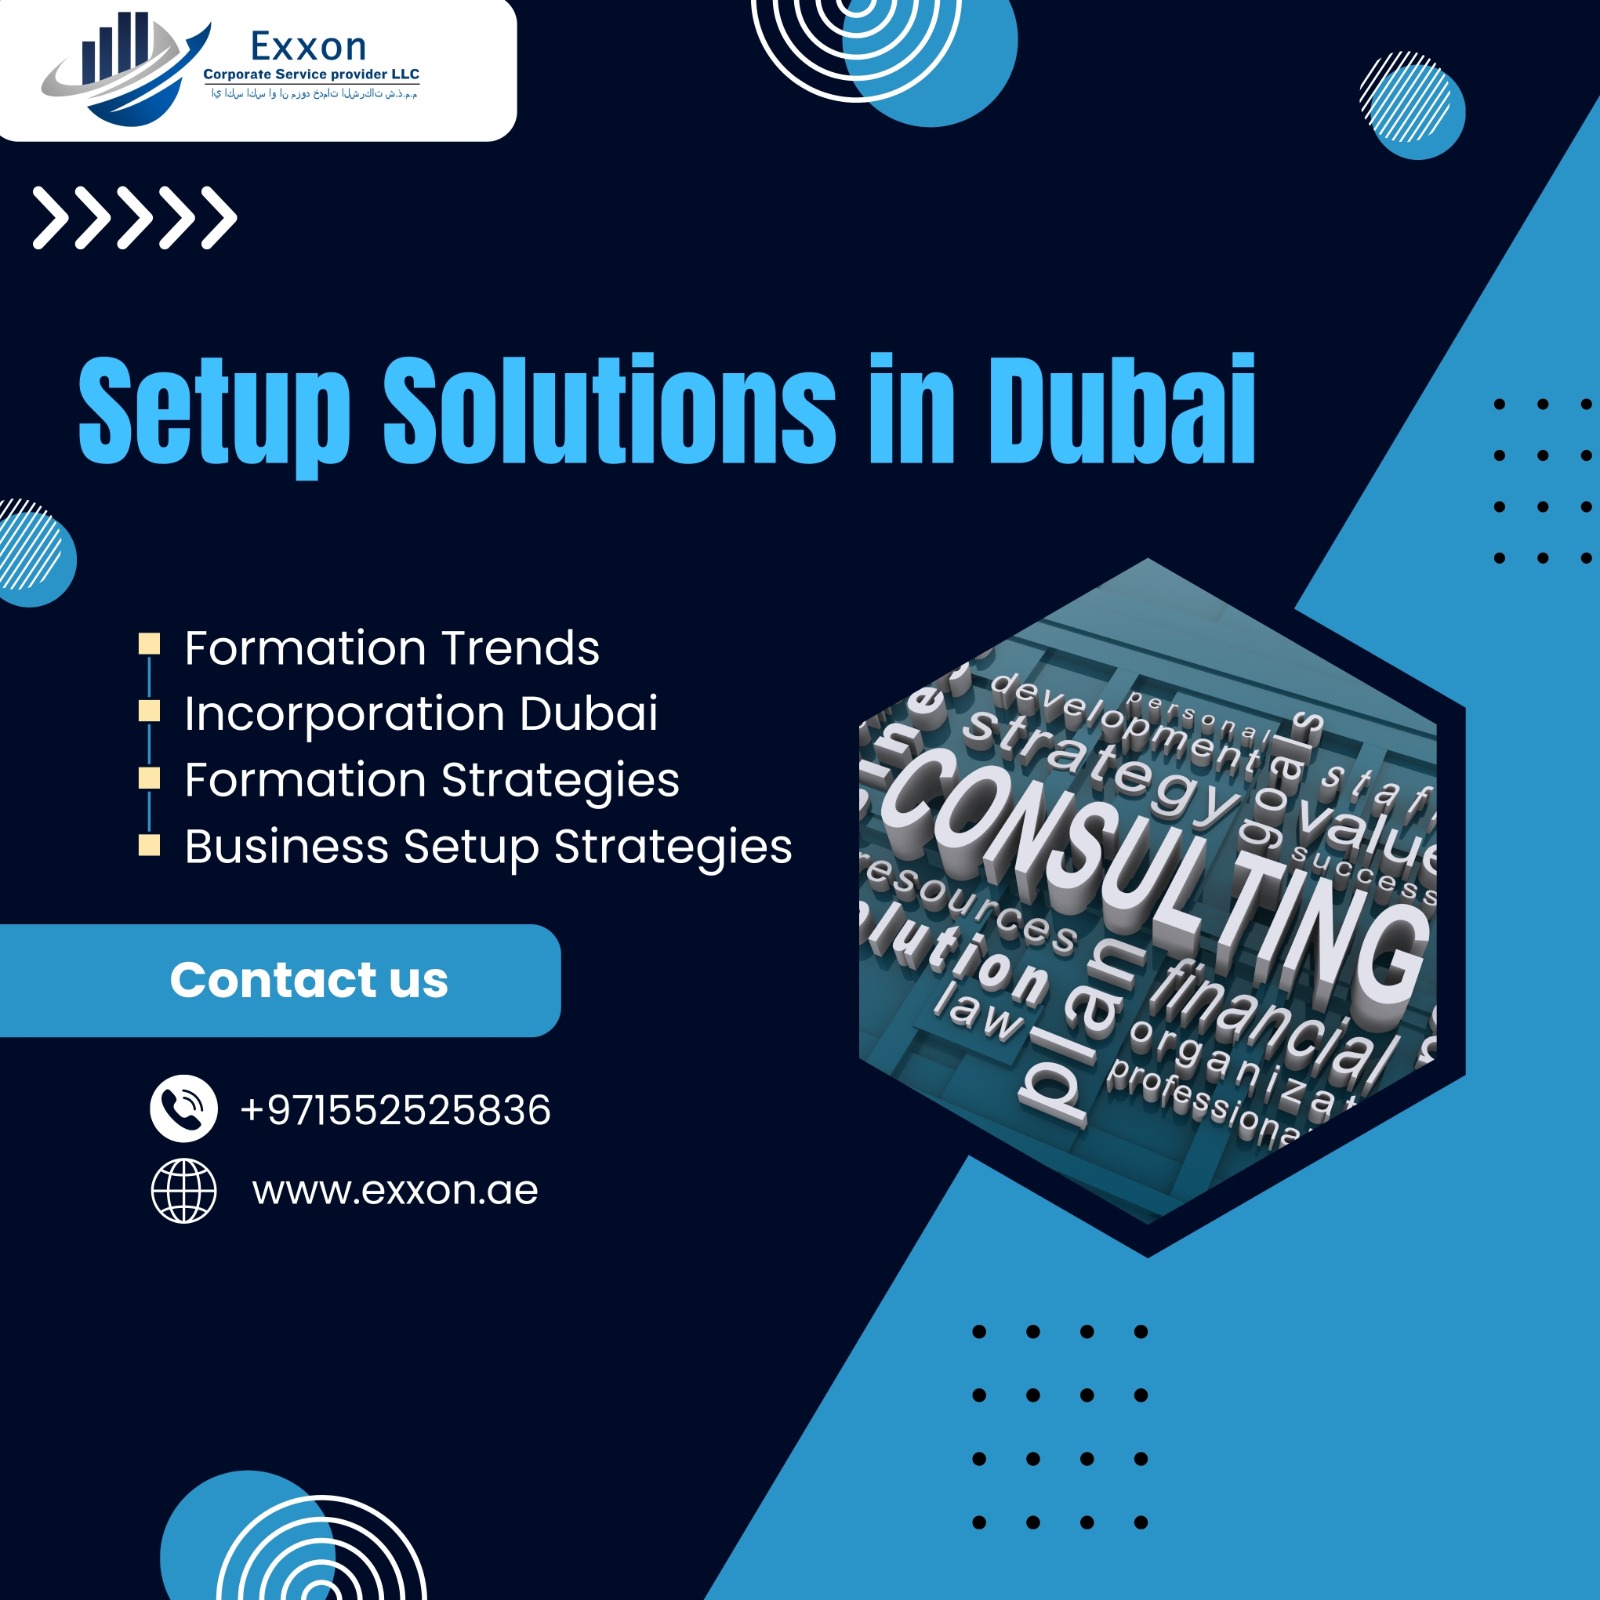 Company Formation in UAE | Setting Up A Company In UAE |Dubai Company Registration | Dubai Company Registration | Benefits of Business Set Up in Dubai | Exxon